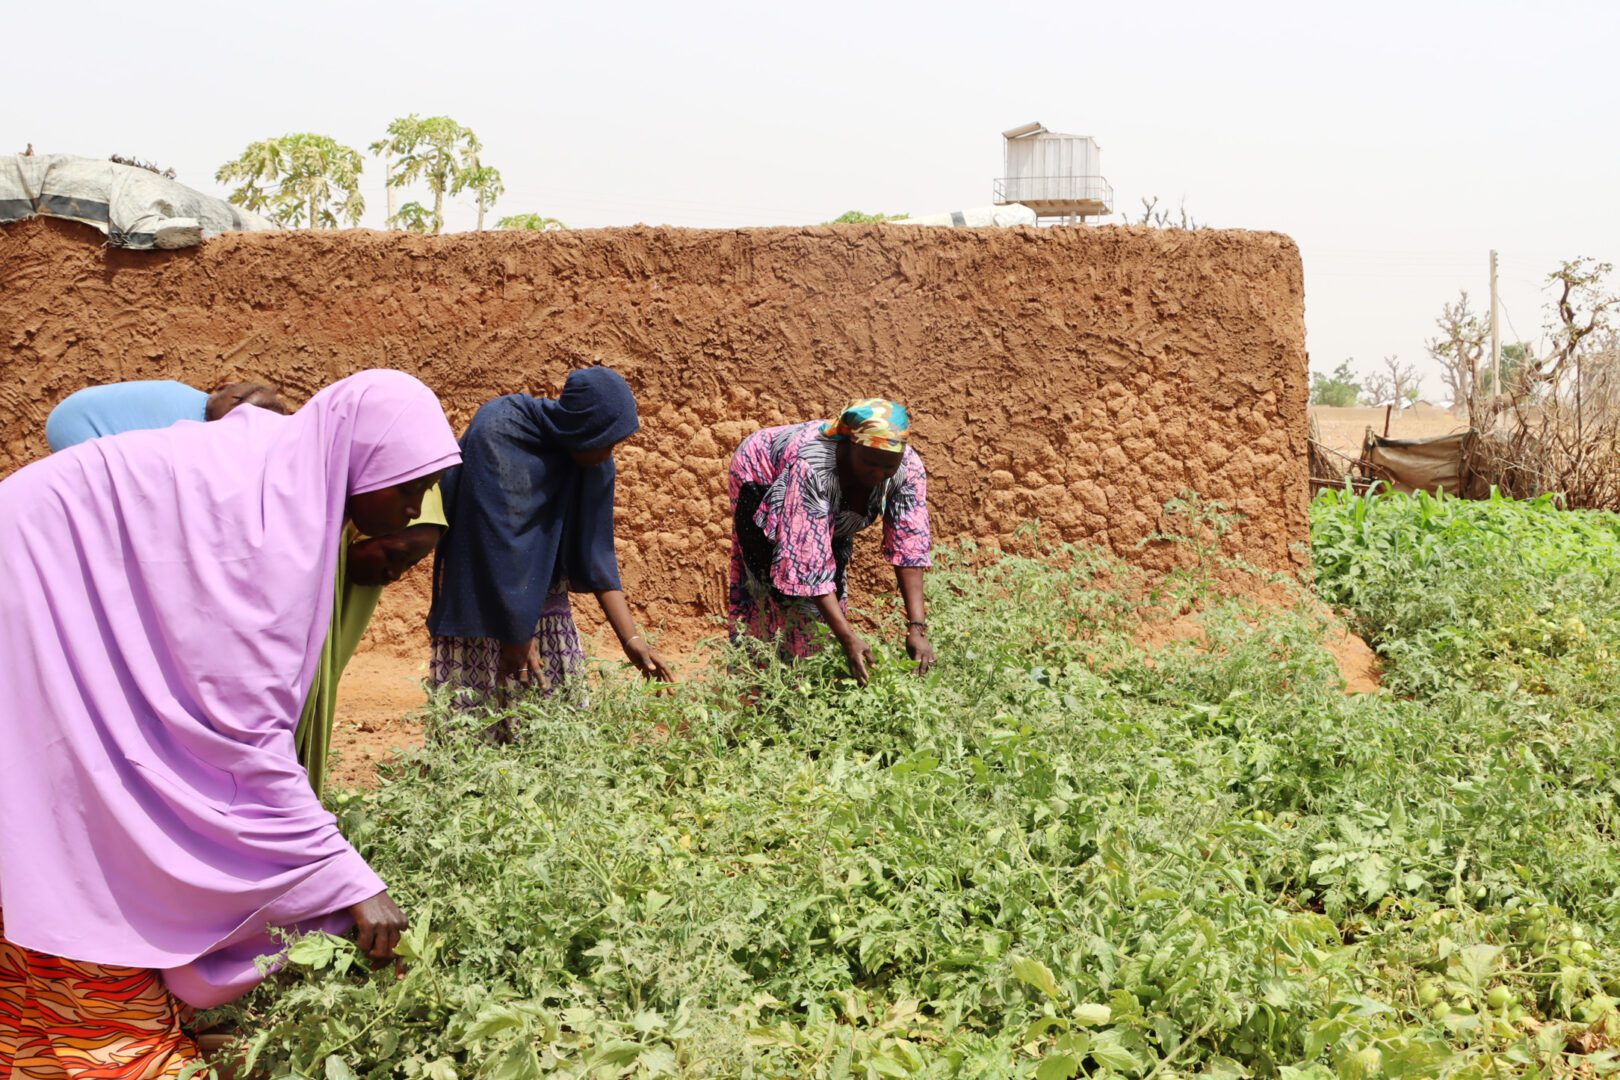 Four Nigerian women work in a garden as part of a food security project.